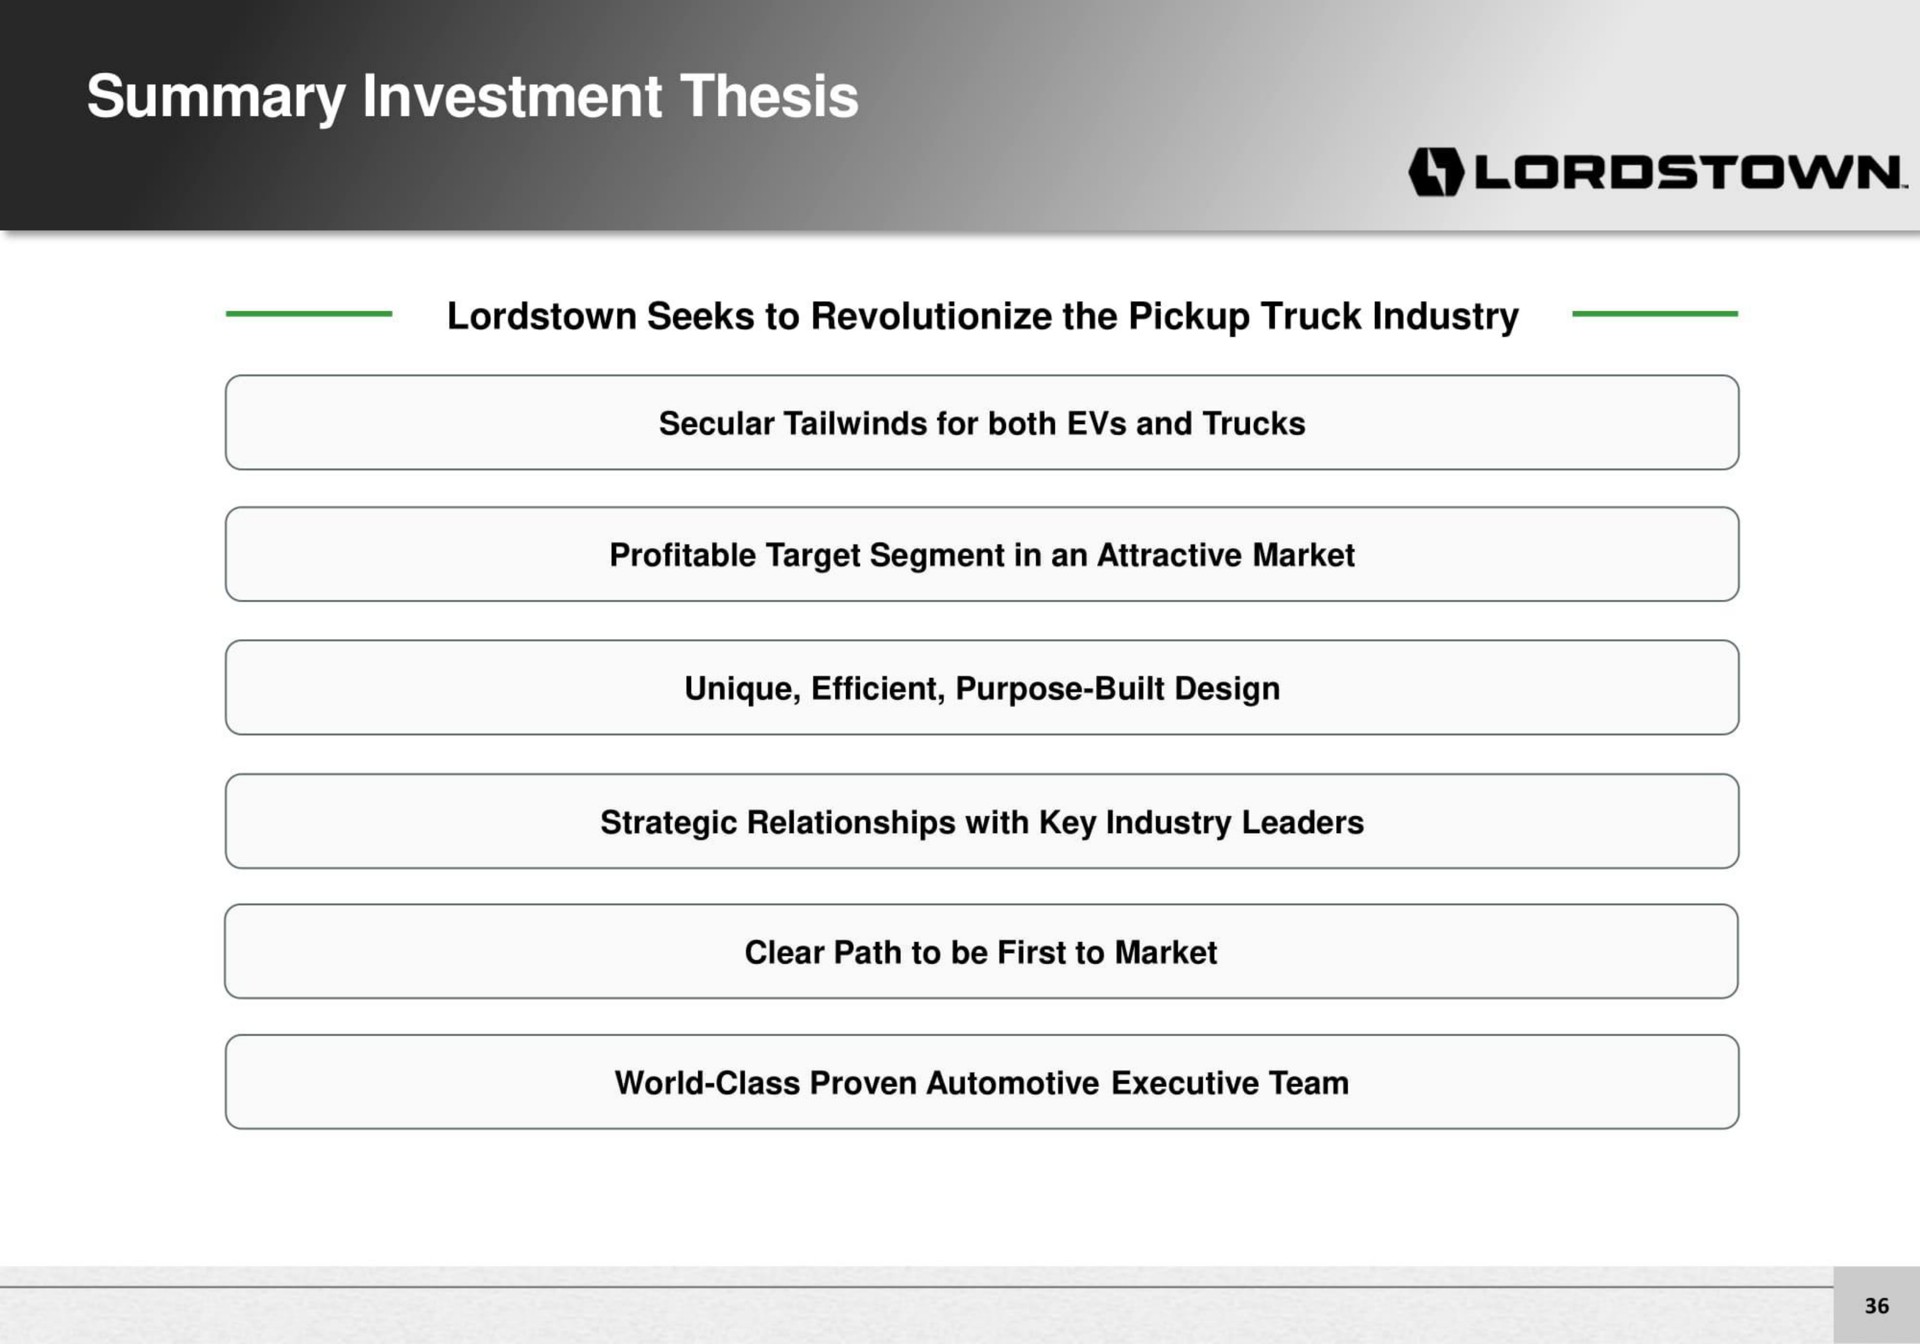 summary investment thesis | Lordstown Motors